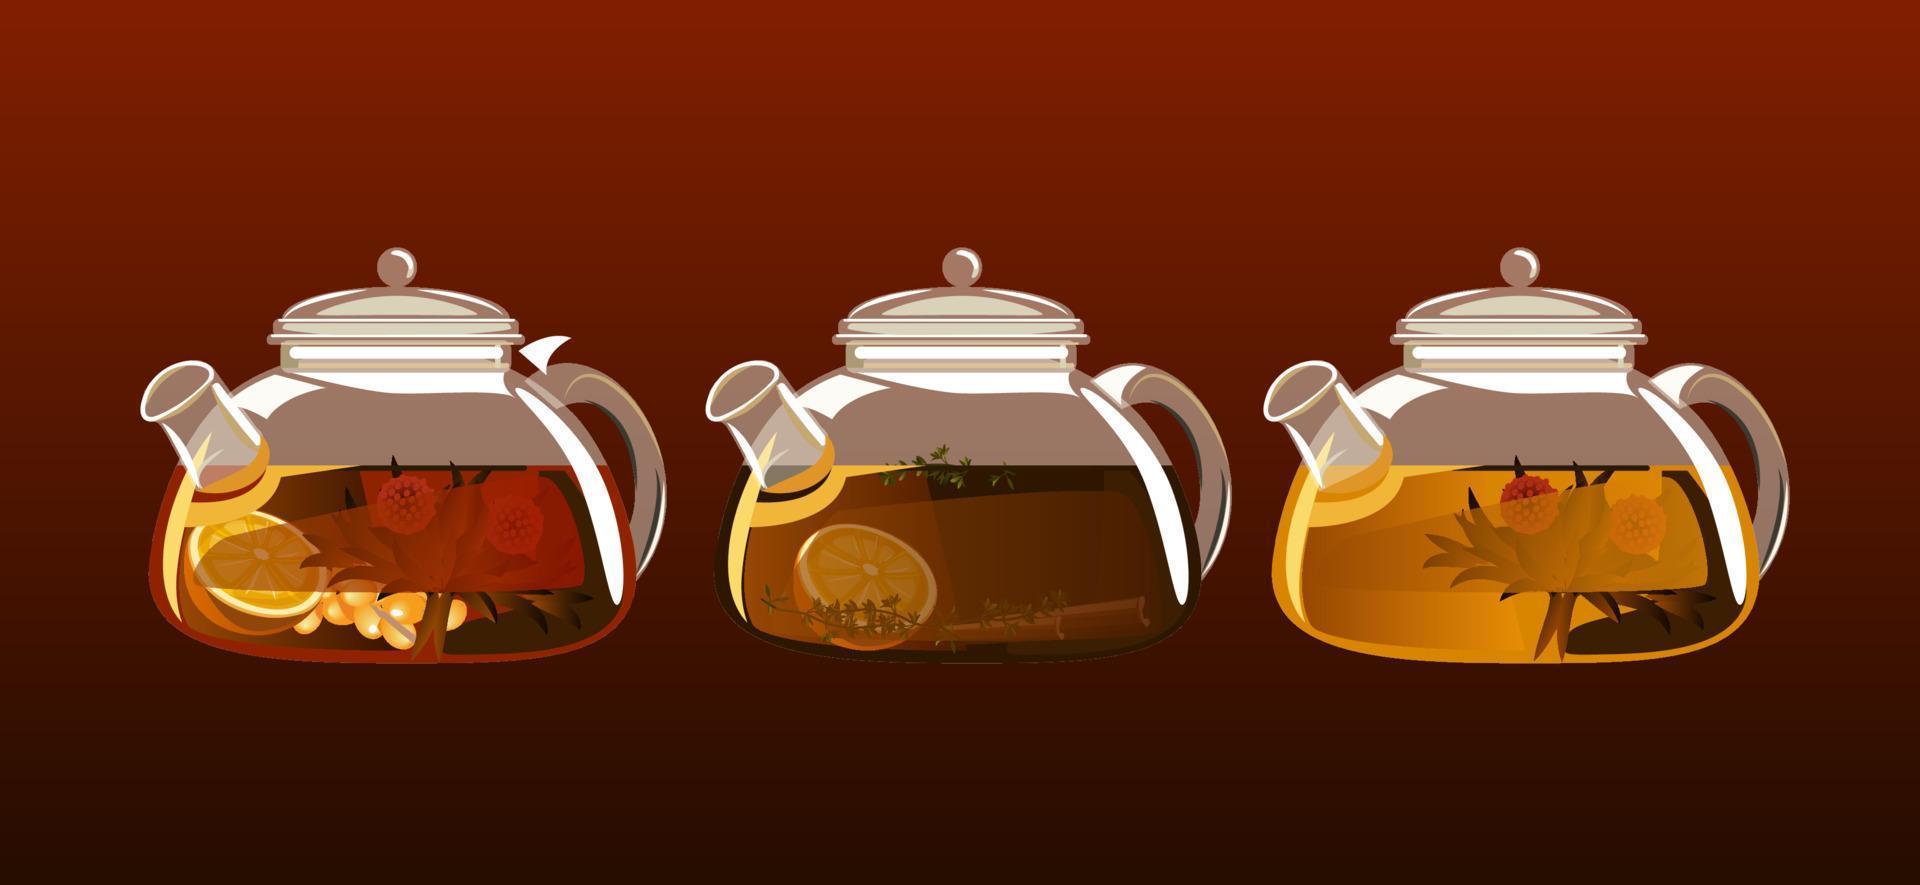 Kettle with the tea set. Exotic green tea with flowers in glass teapot. Vector illustration.